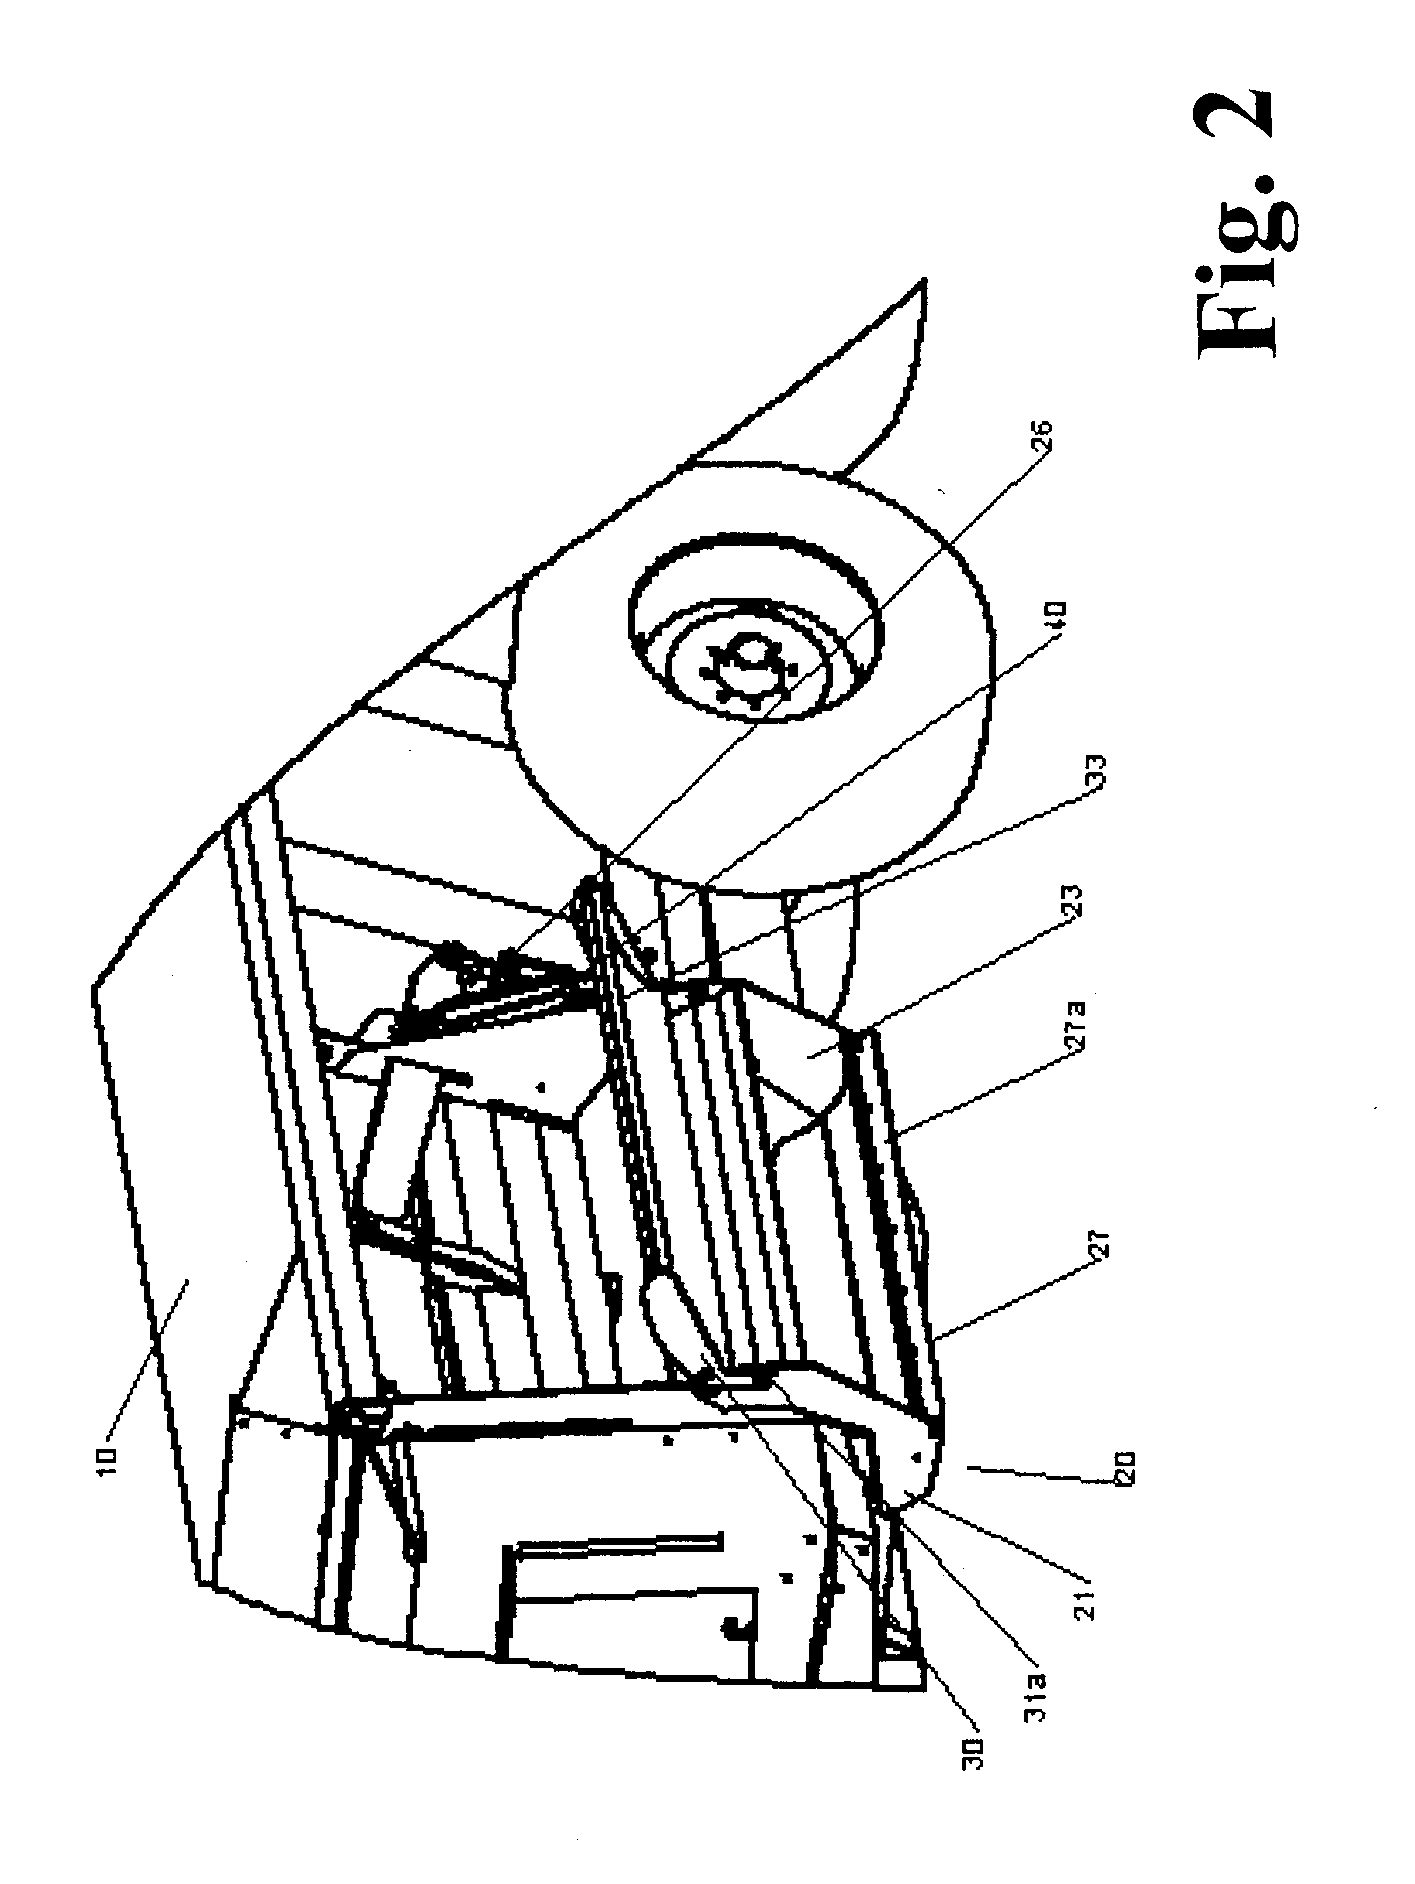 Combination material deflector and door seal for a material spreader